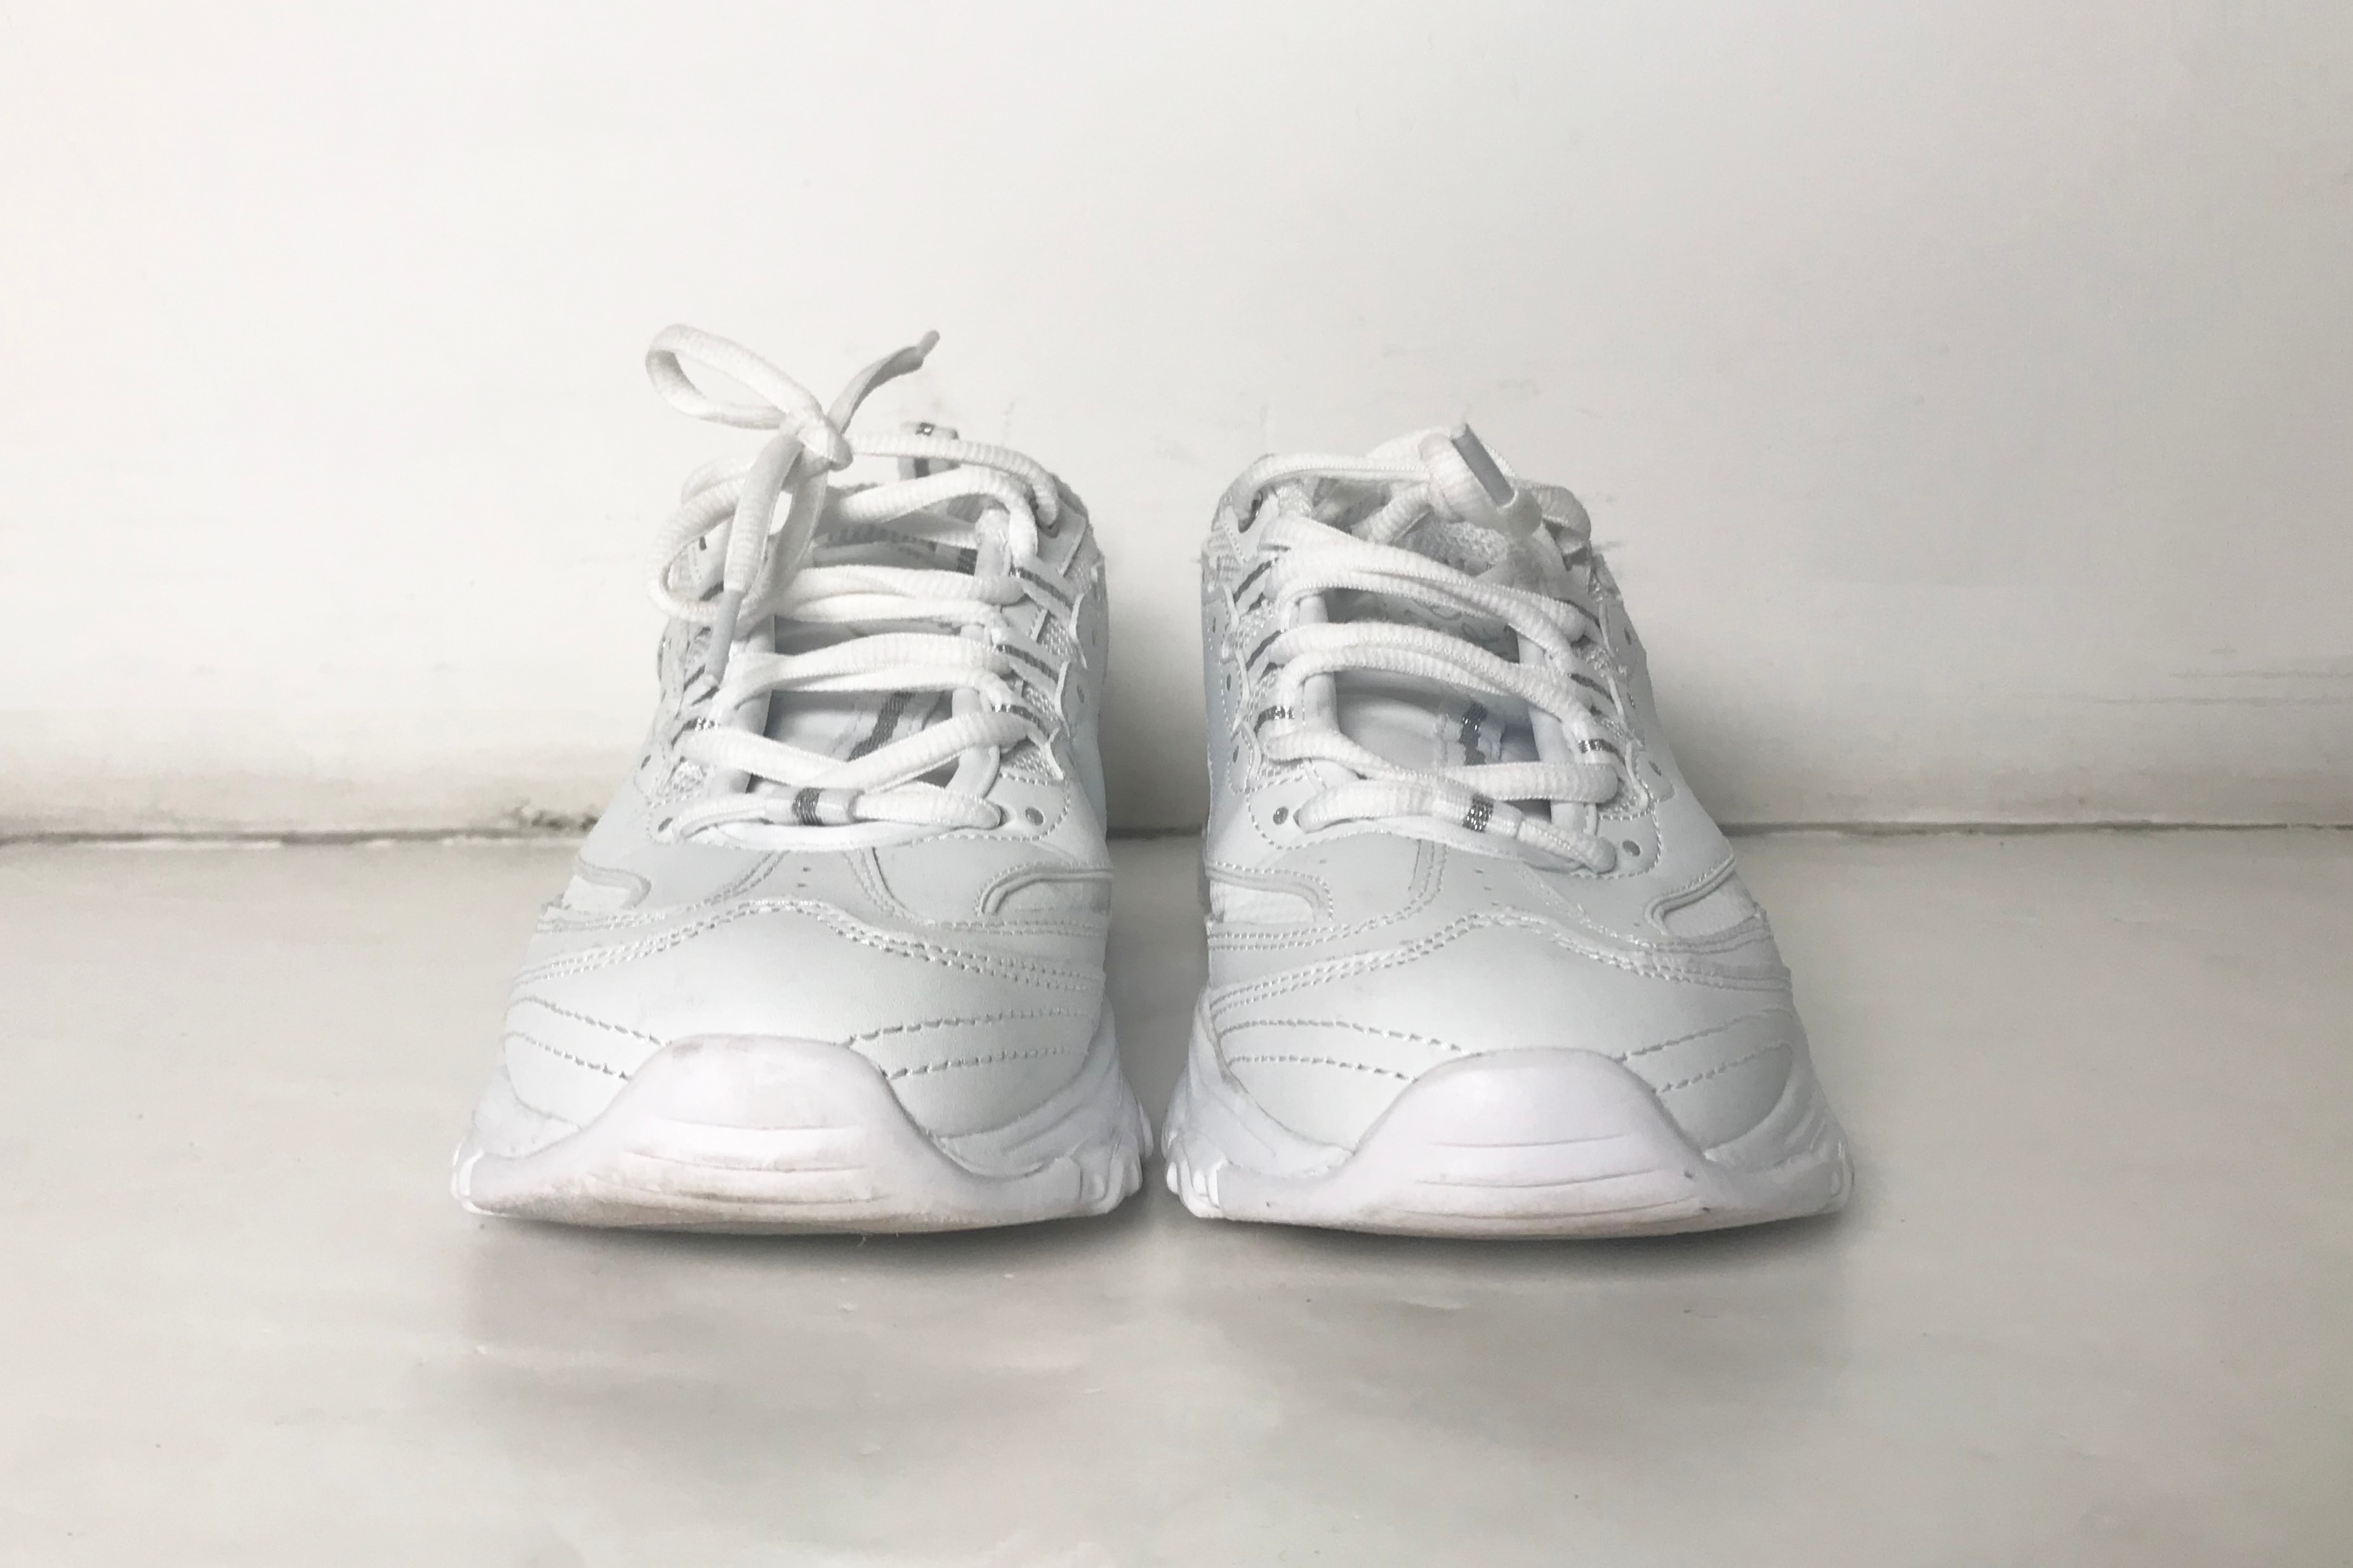 Review of the Skechers D'Lites Sneakers in White